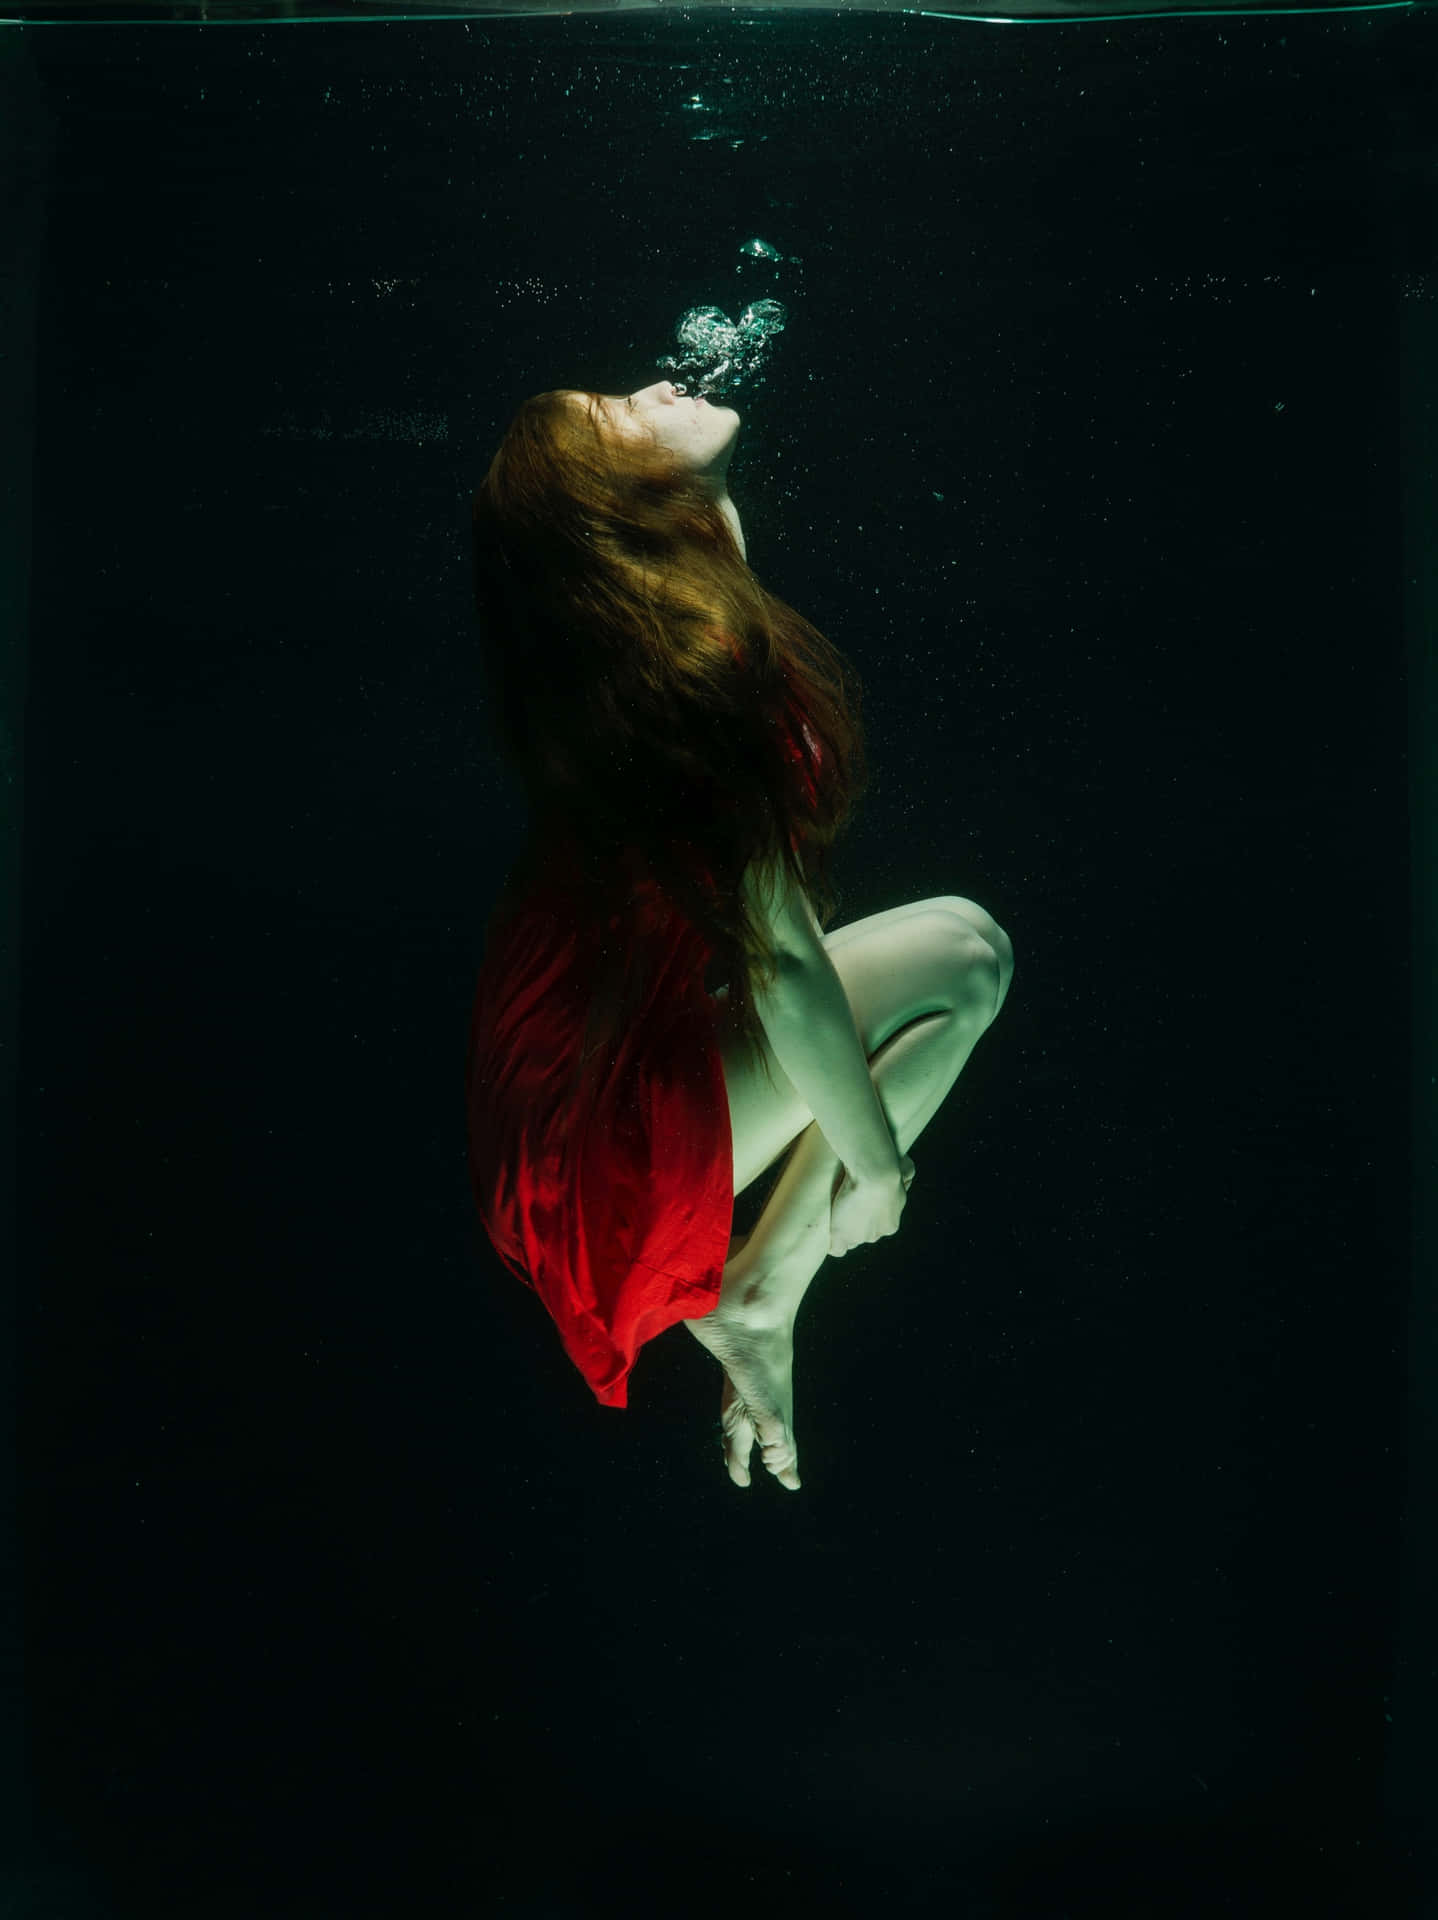 Dive into the depths of your subconscious